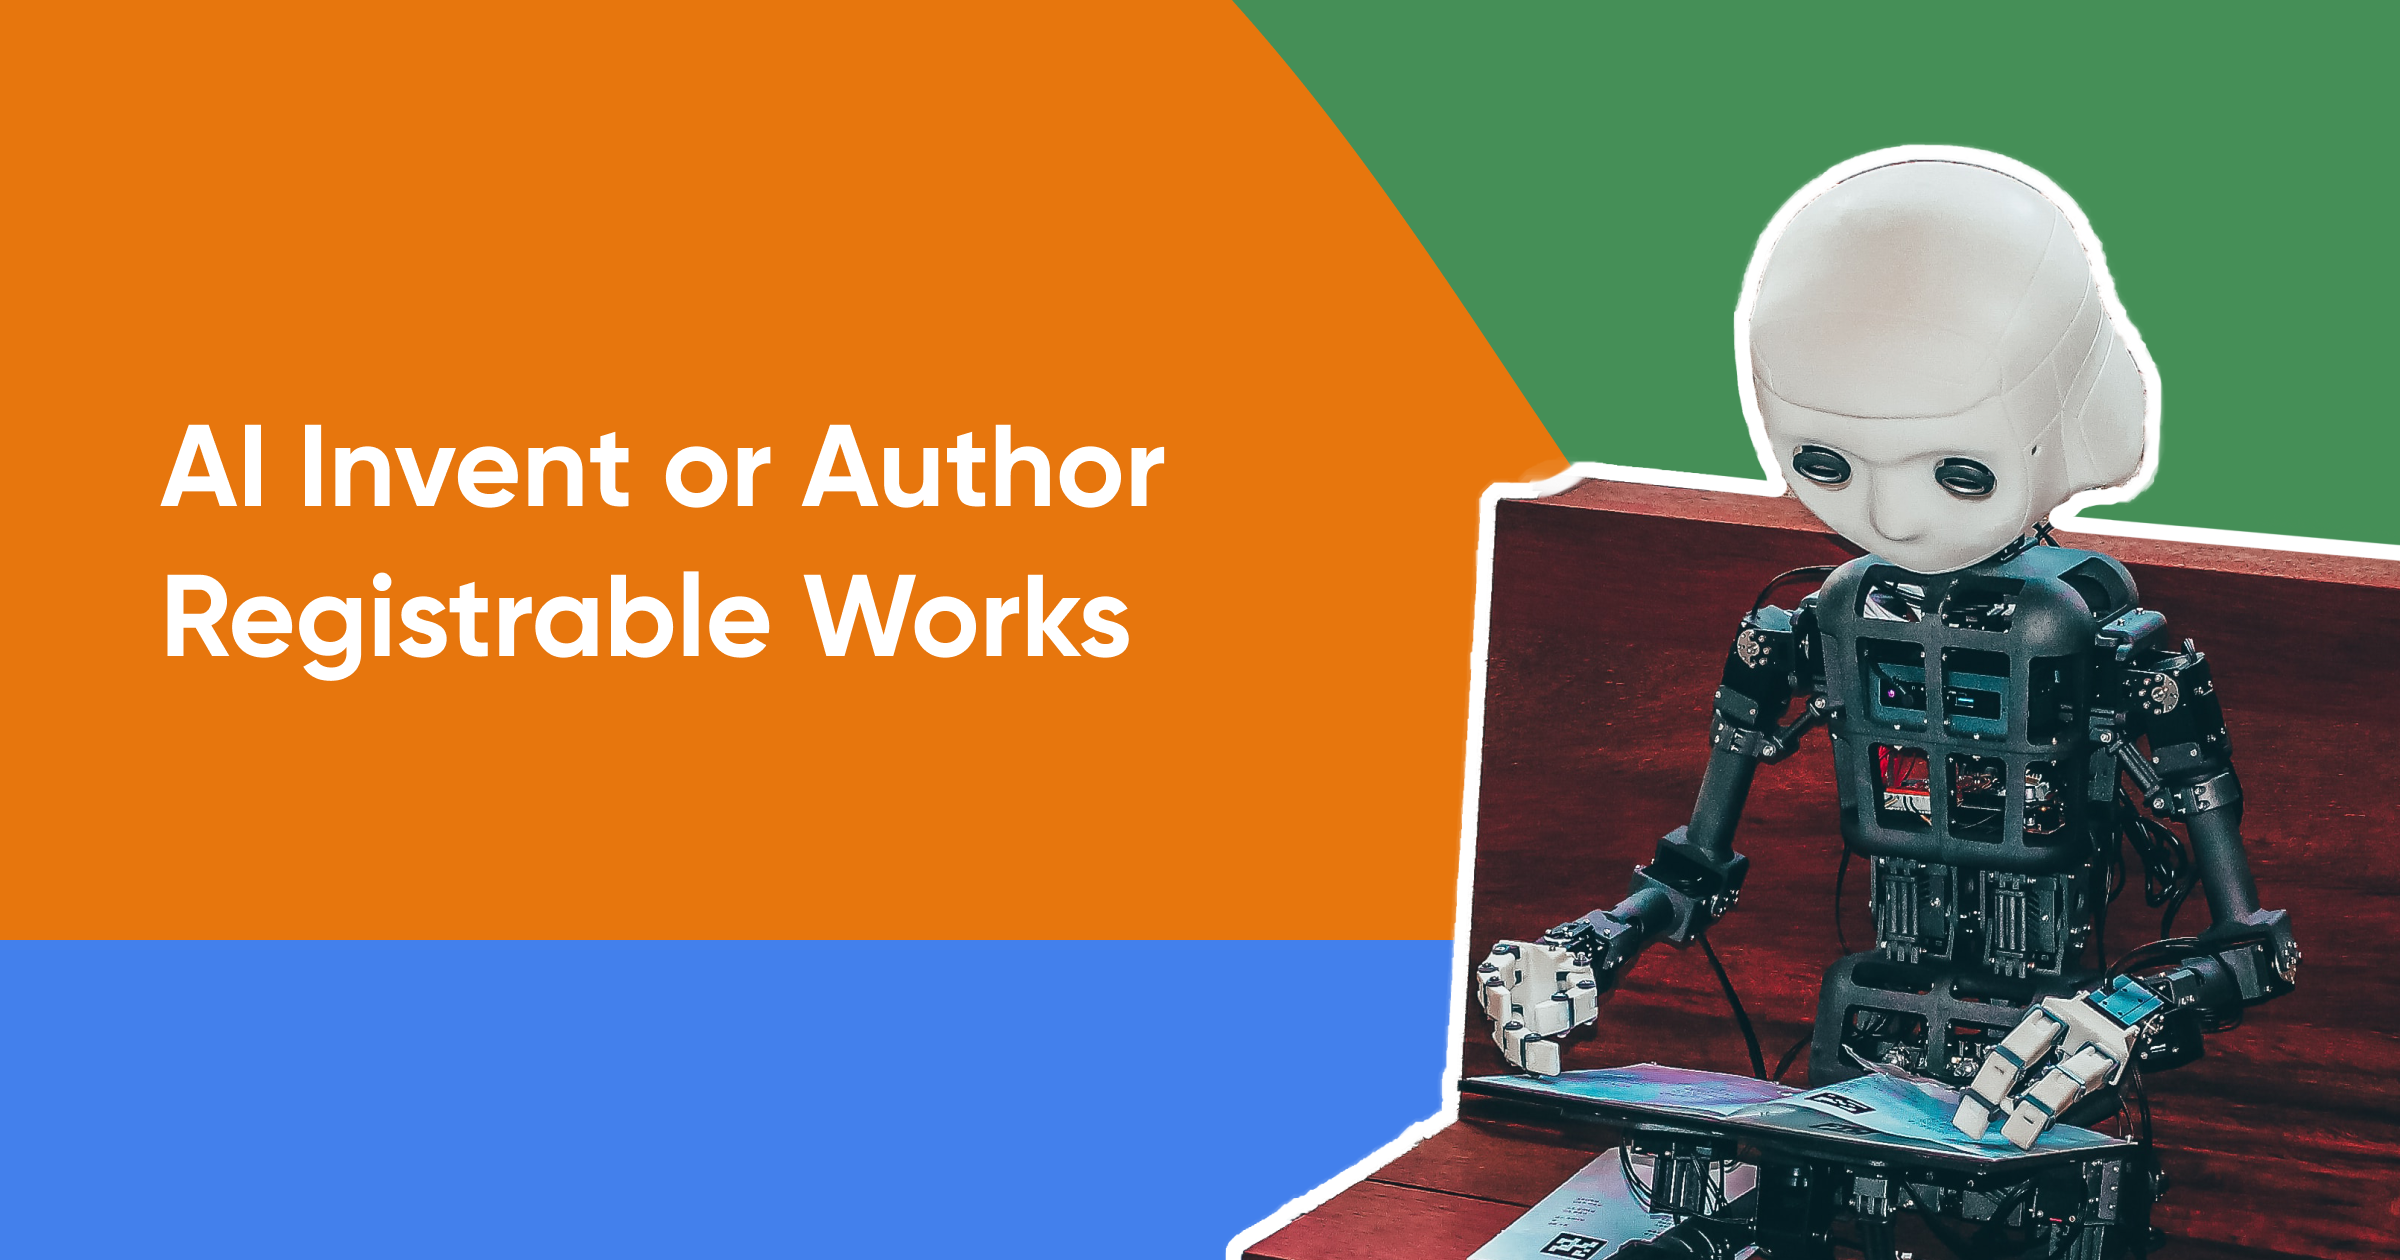 AI Invent or Author Registrable Works